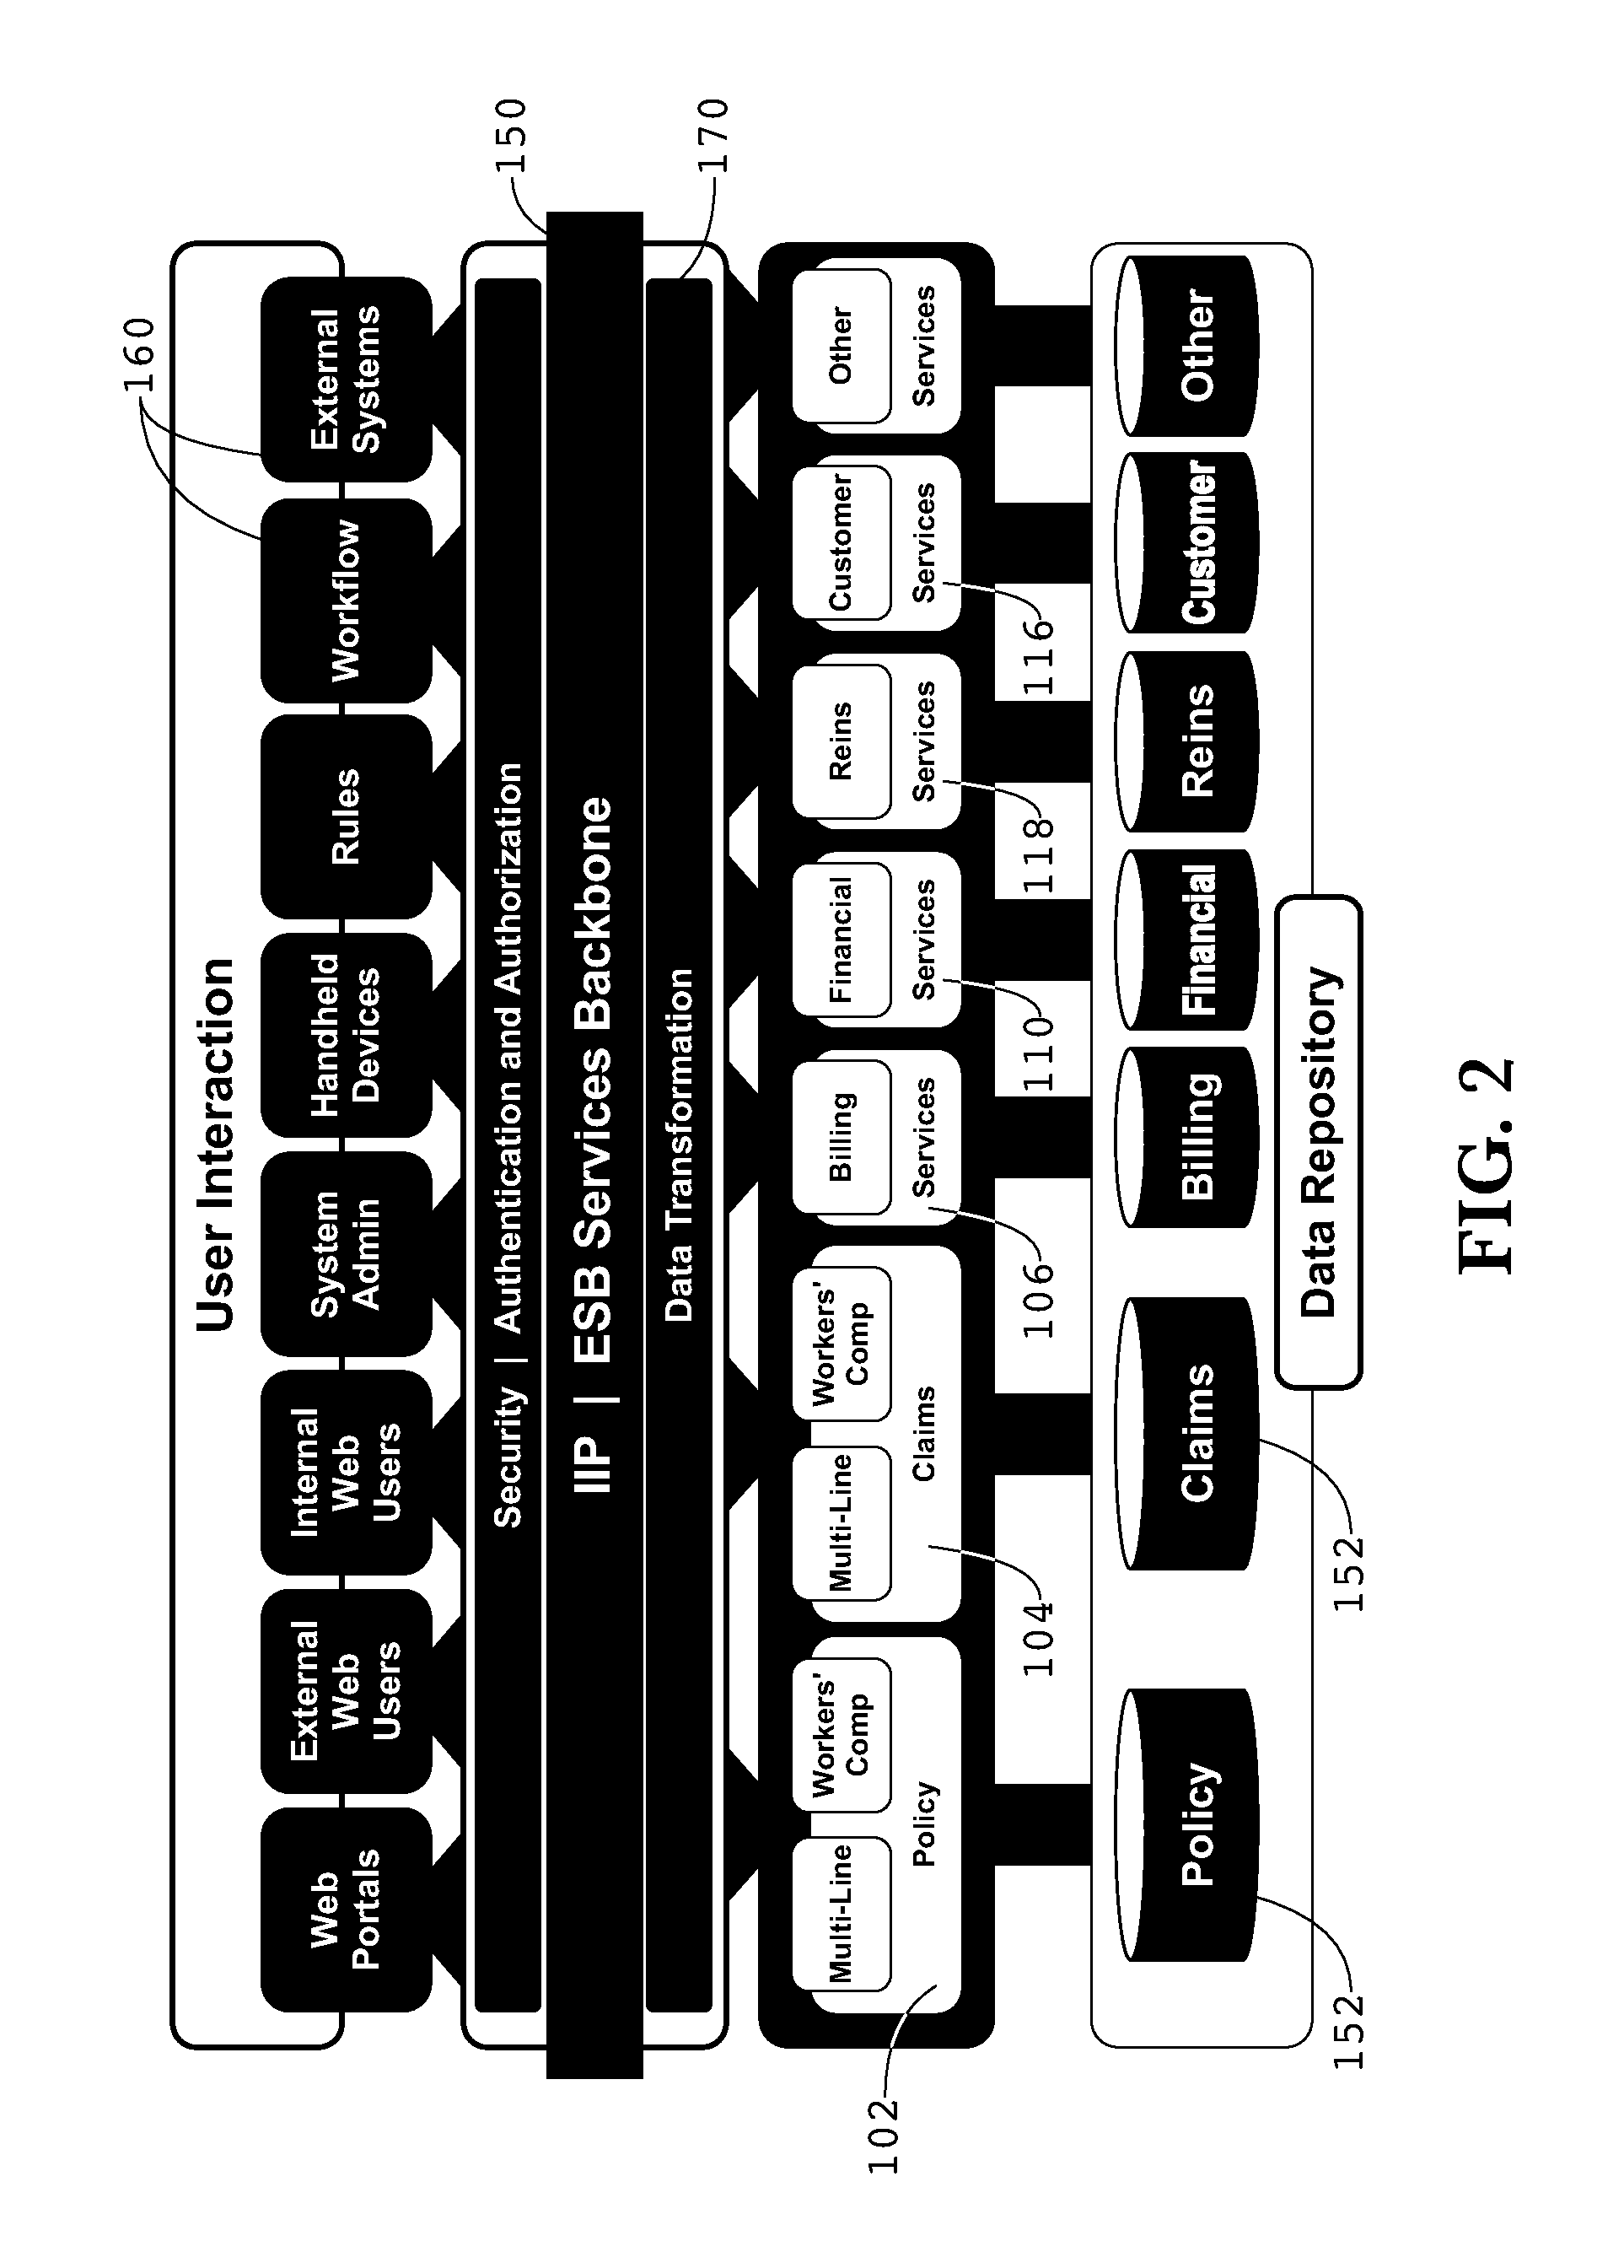 Semantic model for insurance software components